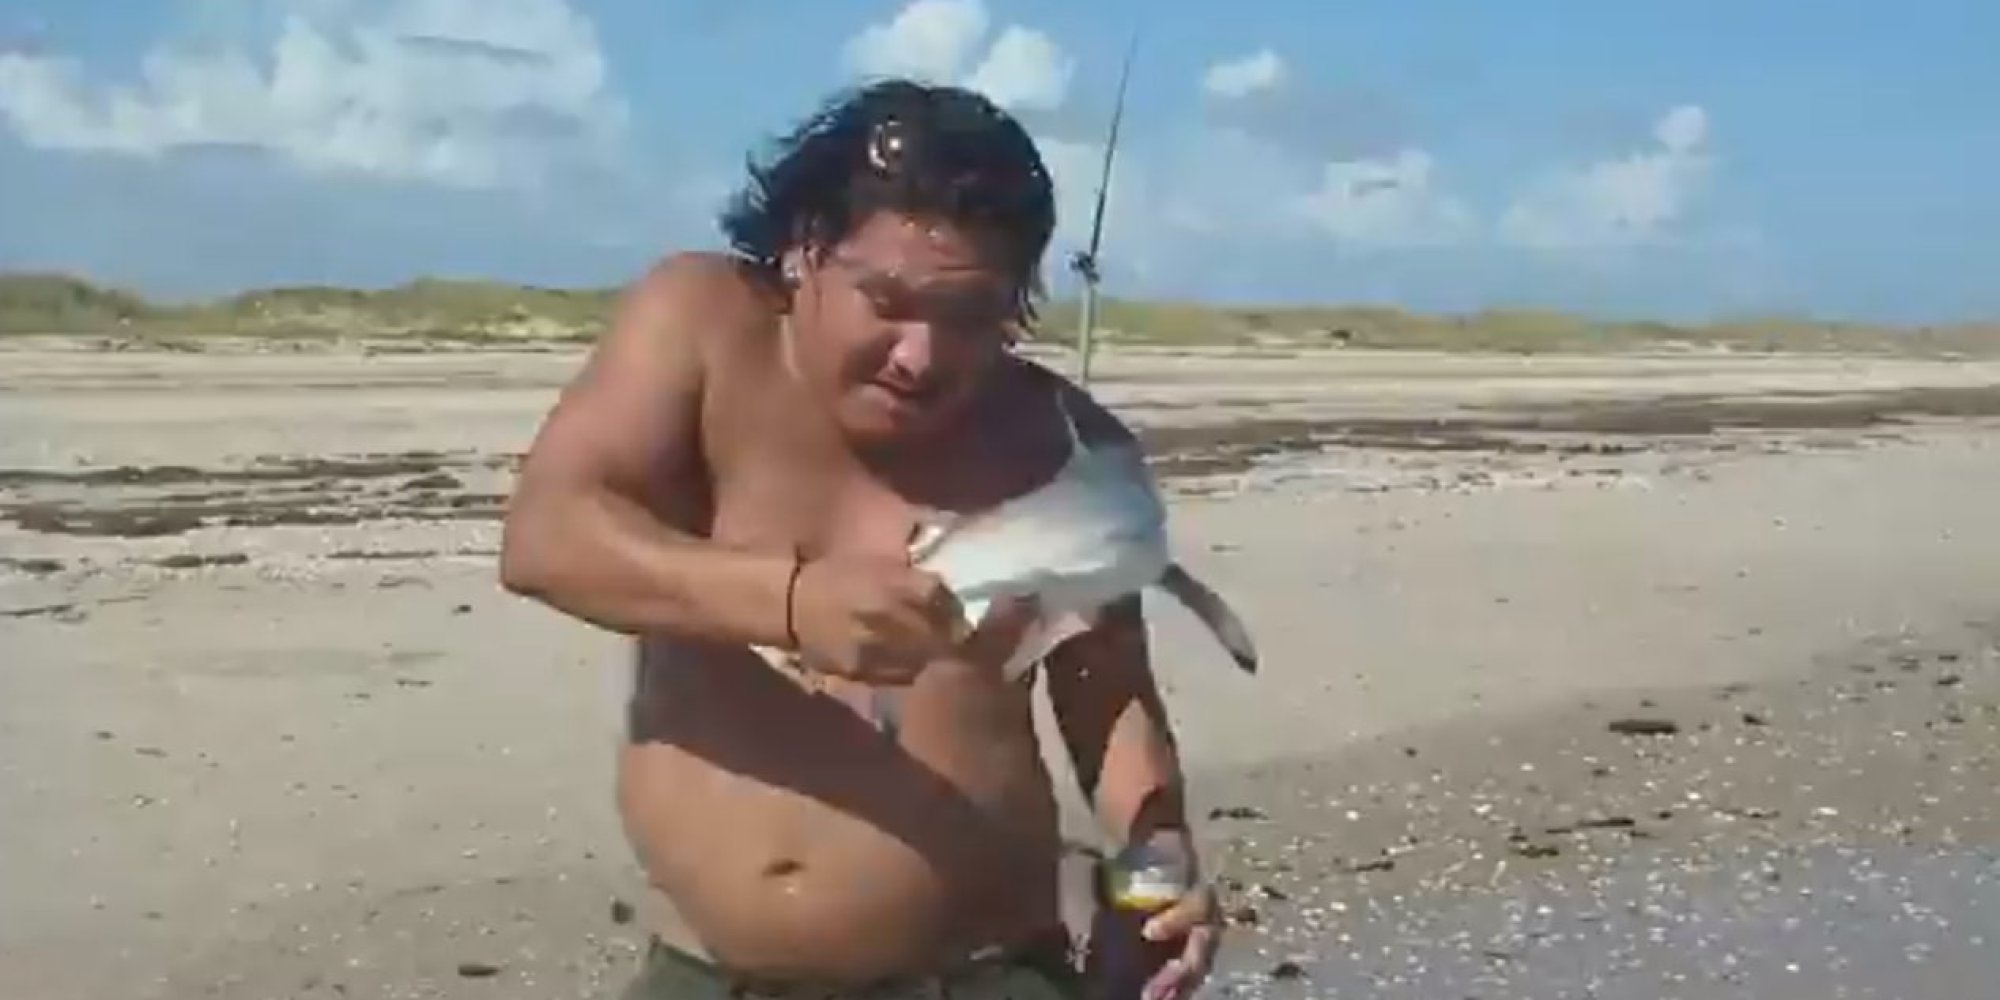 Idiot Holding A Baby Shark And A Beer Gets Bit | HuffPost2000 x 1000